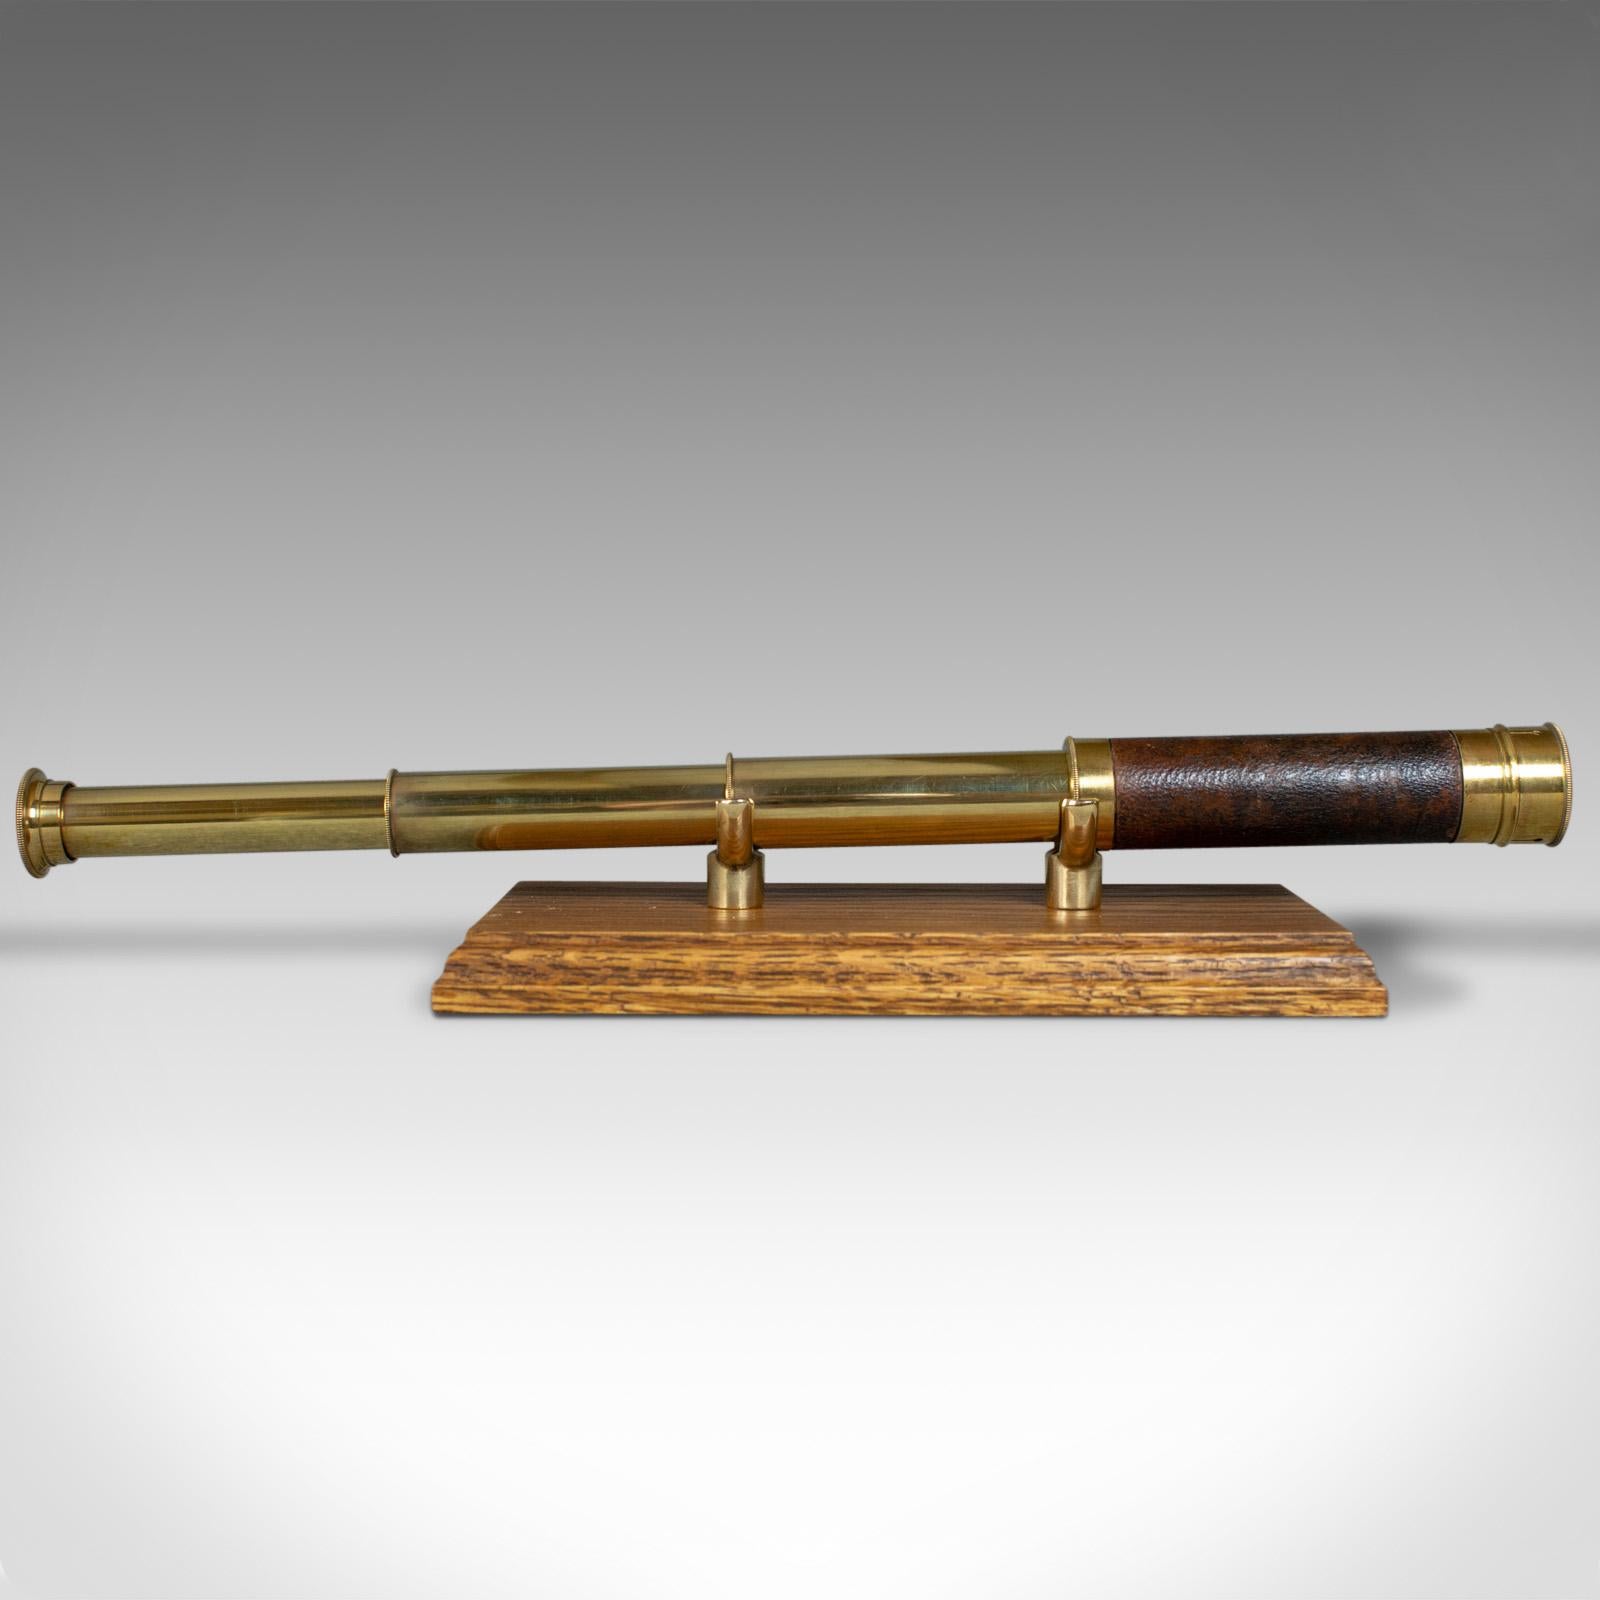 This is an antique pocket telescope, a three draw refractor for terrestrial or astronomical use. An English Victorian scope dating to the late 19th century, circa 1890.

Perfect for bird watching, landscape appreciation, wildlife, or maritime